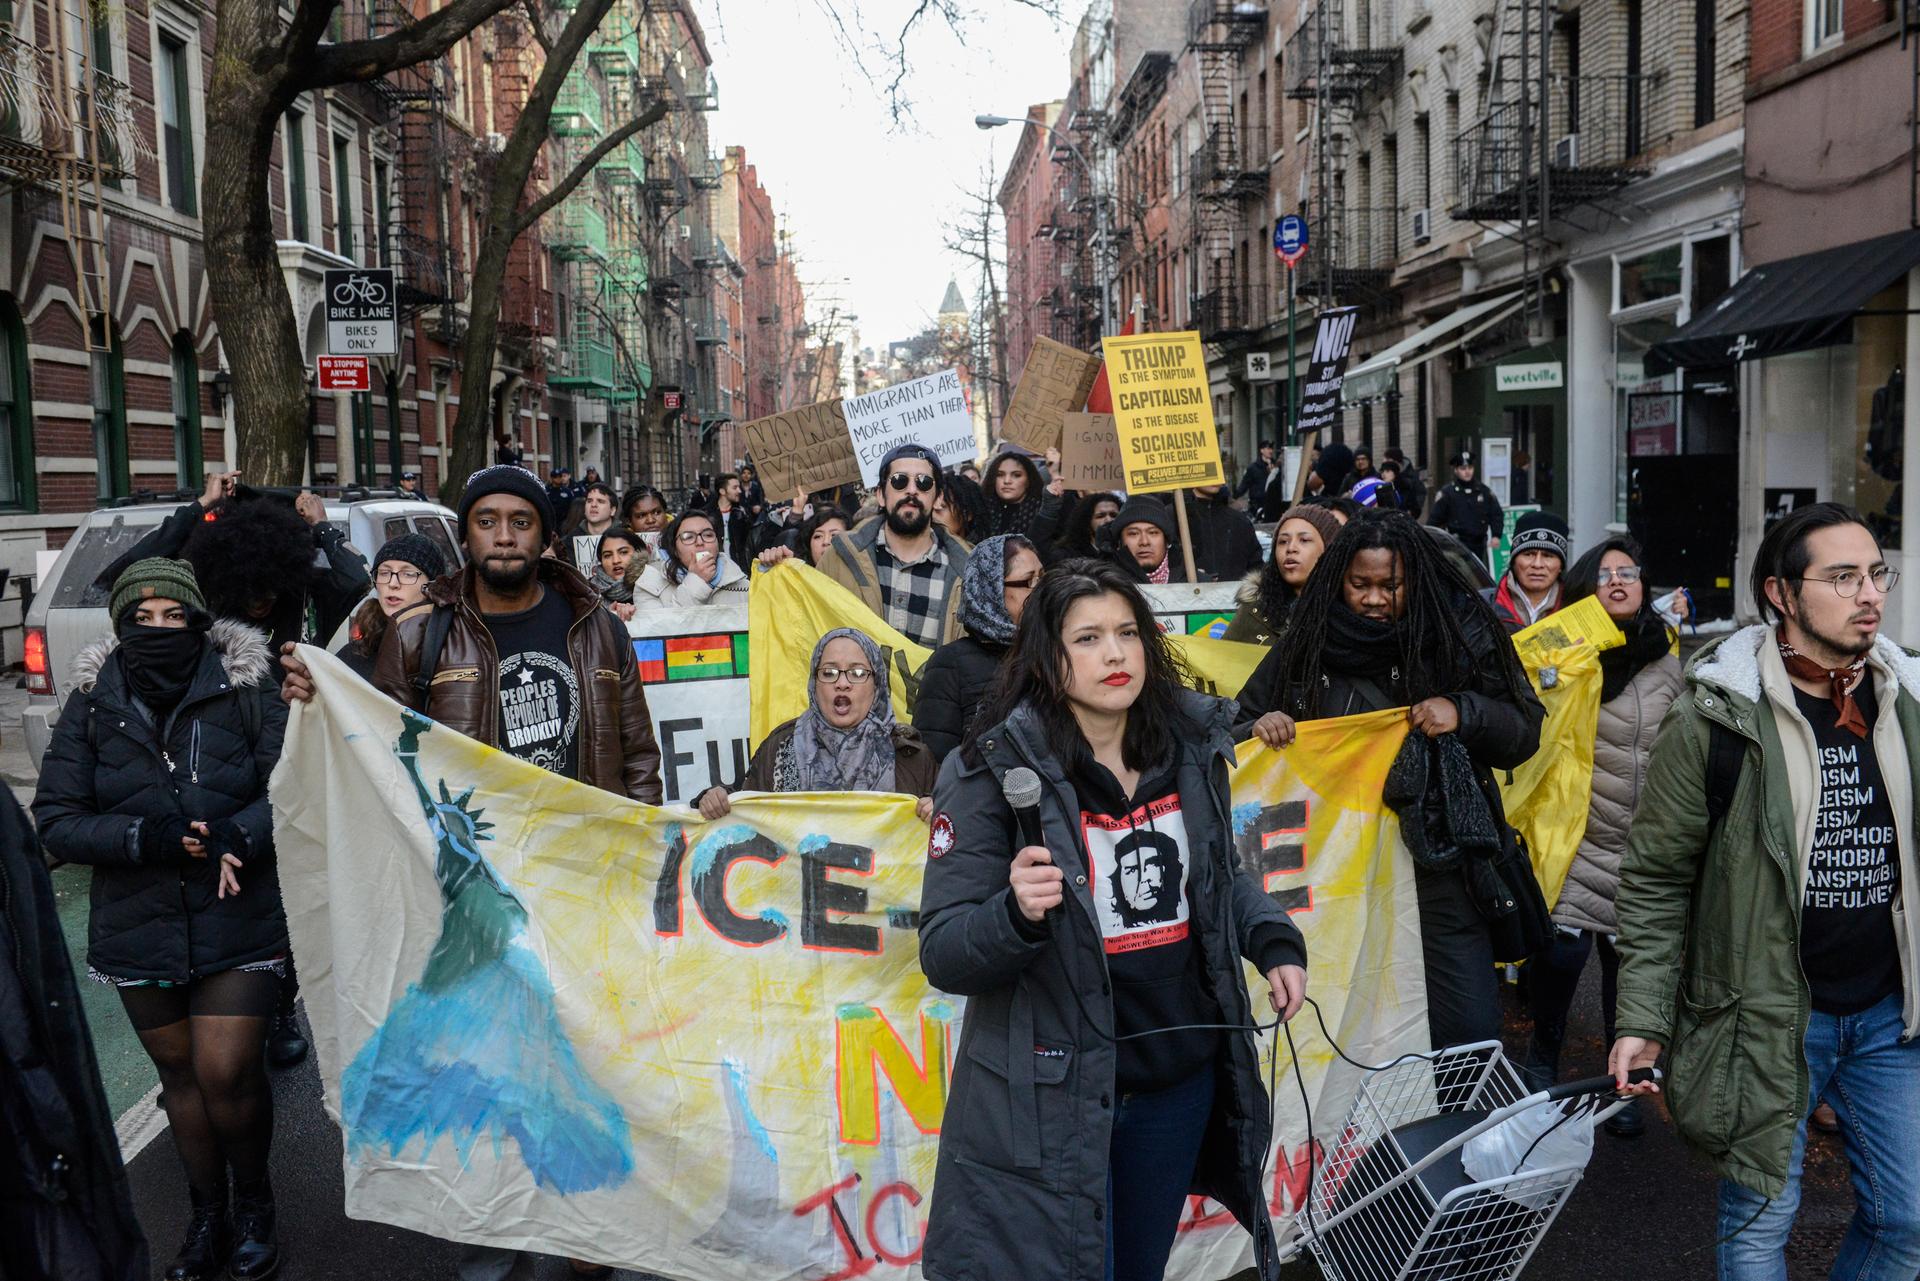 People participate in a protest against U.S. President Donald Trump's immigration policy and the recent Immigration and Customs Enforcement (ICE) raids in New York City, U.S. February 11, 2017. 